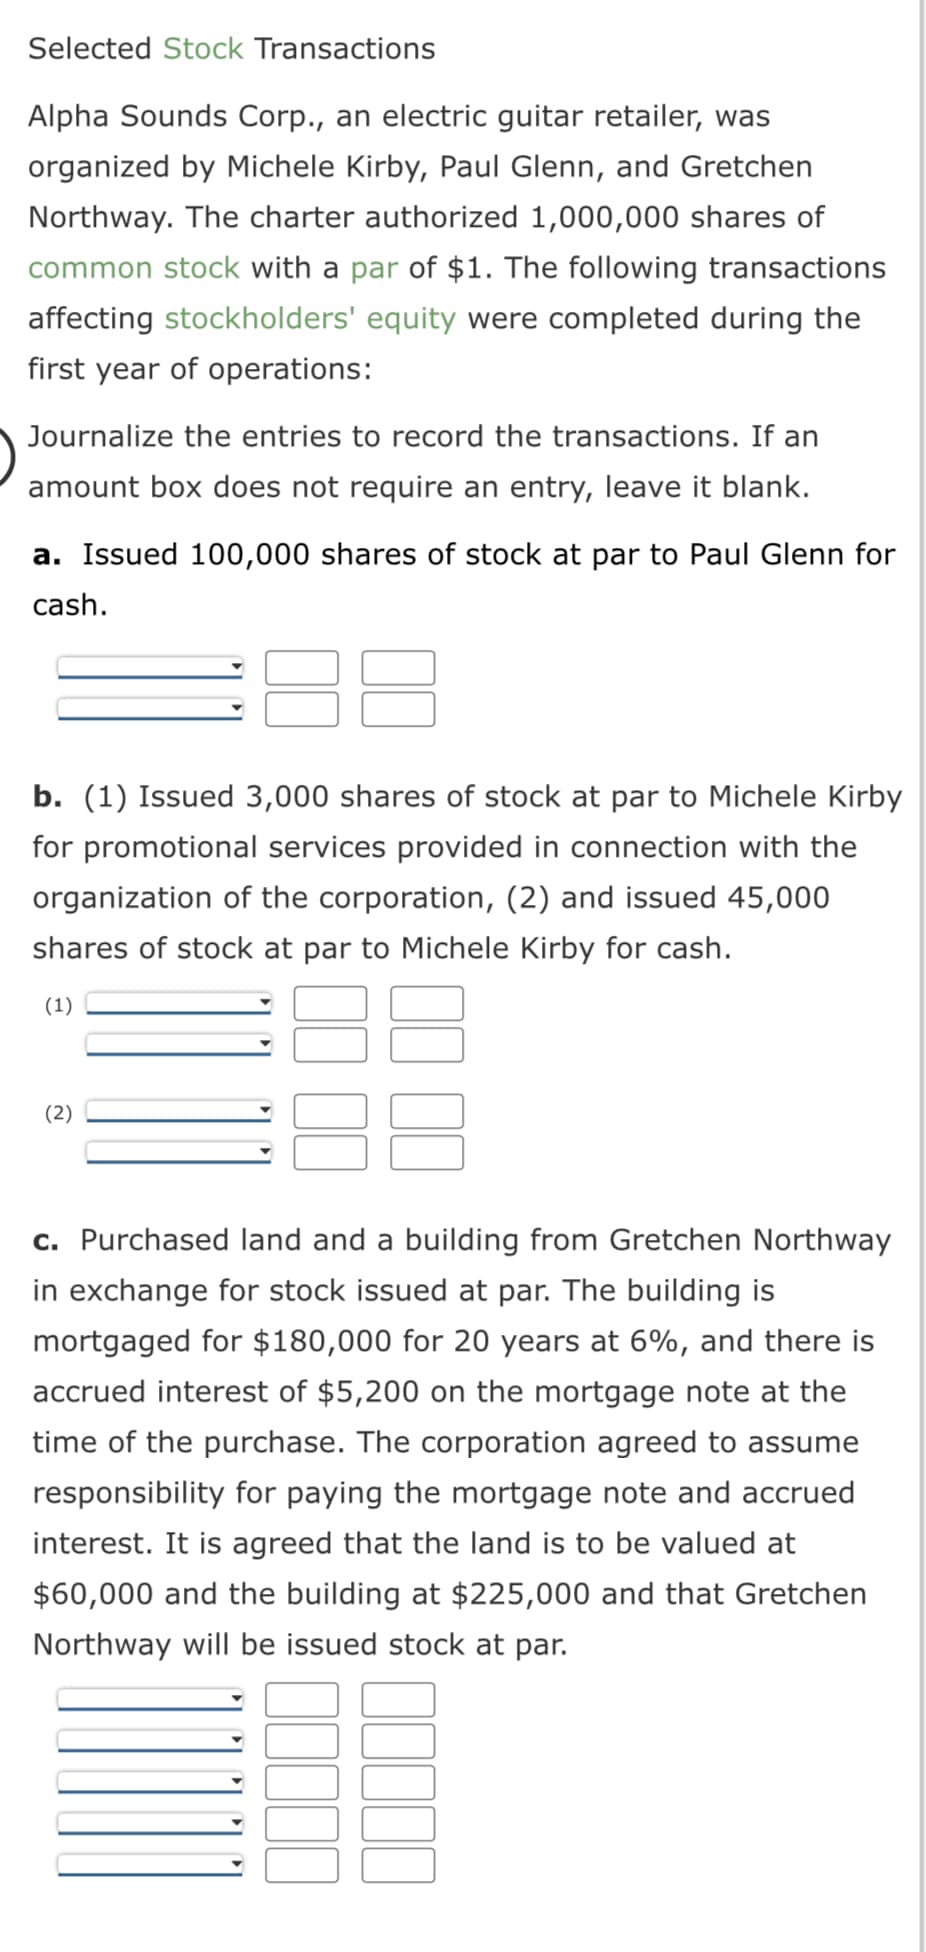 Selected Stock Transactions
Alpha Sounds Corp., an electric guitar retailer, was
organized by Michele Kirby, Paul Glenn, and Gretchen
Northway. The charter authorized 1,000,000 shares of
common stock with a par of $1. The following transactions
affecting stockholders' equity were completed during the
first year of operations:
Journalize the entries to record the transactions. If an
amount box does not require an entry, leave it blank.
a. Issued 100,000 shares of stock at par to Paul Glenn for
cash.
8
b. (1) Issued 3,000 shares of stock at par to Michele Kirby
for promotional services provided in connection with the
organization of the corporation, (2) and issued 45,000
shares of stock at par to Michele Kirby for cash.
(1)
(2)
c. Purchased land and a building from Gretchen Northway
in exchange for stock issued at par. The building is
mortgaged for $180,000 for 20 years at 6%, and there is
accrued interest of $5,200 on the mortgage note at the
time of the purchase. The corporation agreed to assume
responsibility for paying the mortgage note and accrued
interest. It is agreed that the land is to be valued at
$60,000 and the building at $225,000 and that Gretchen
Northway will be issued stock at par.